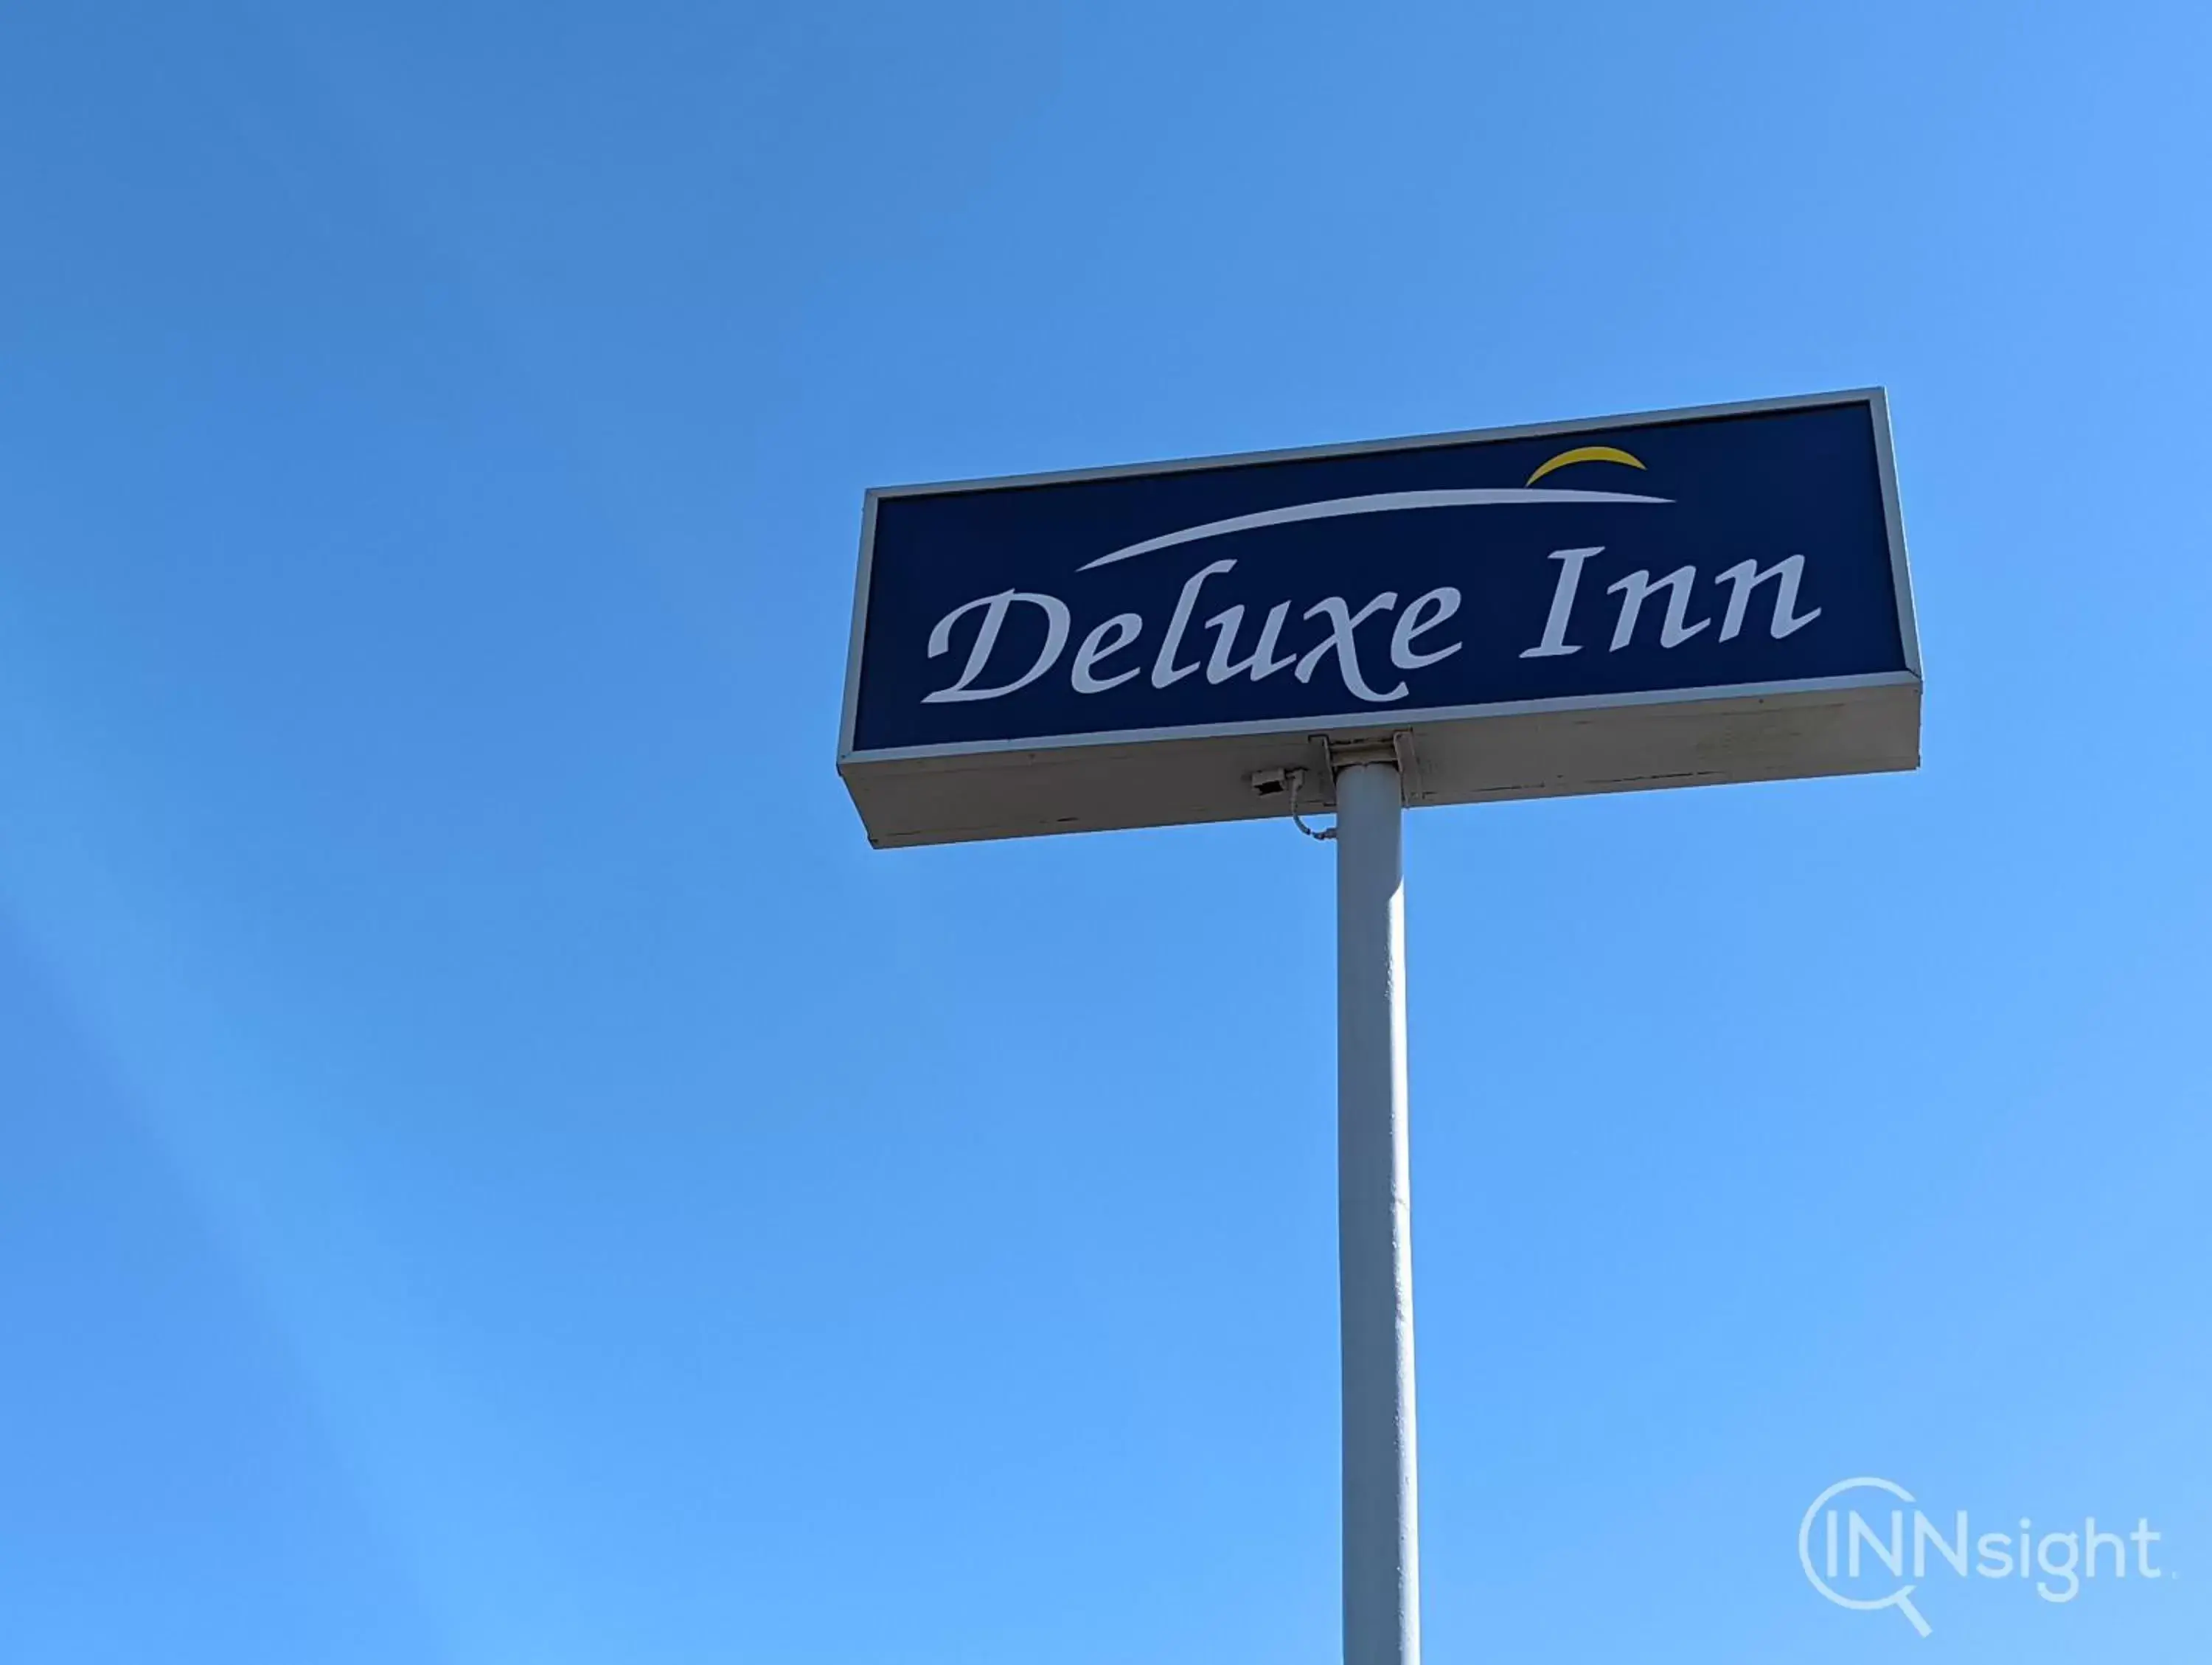 Property logo or sign in Deluxe Inn